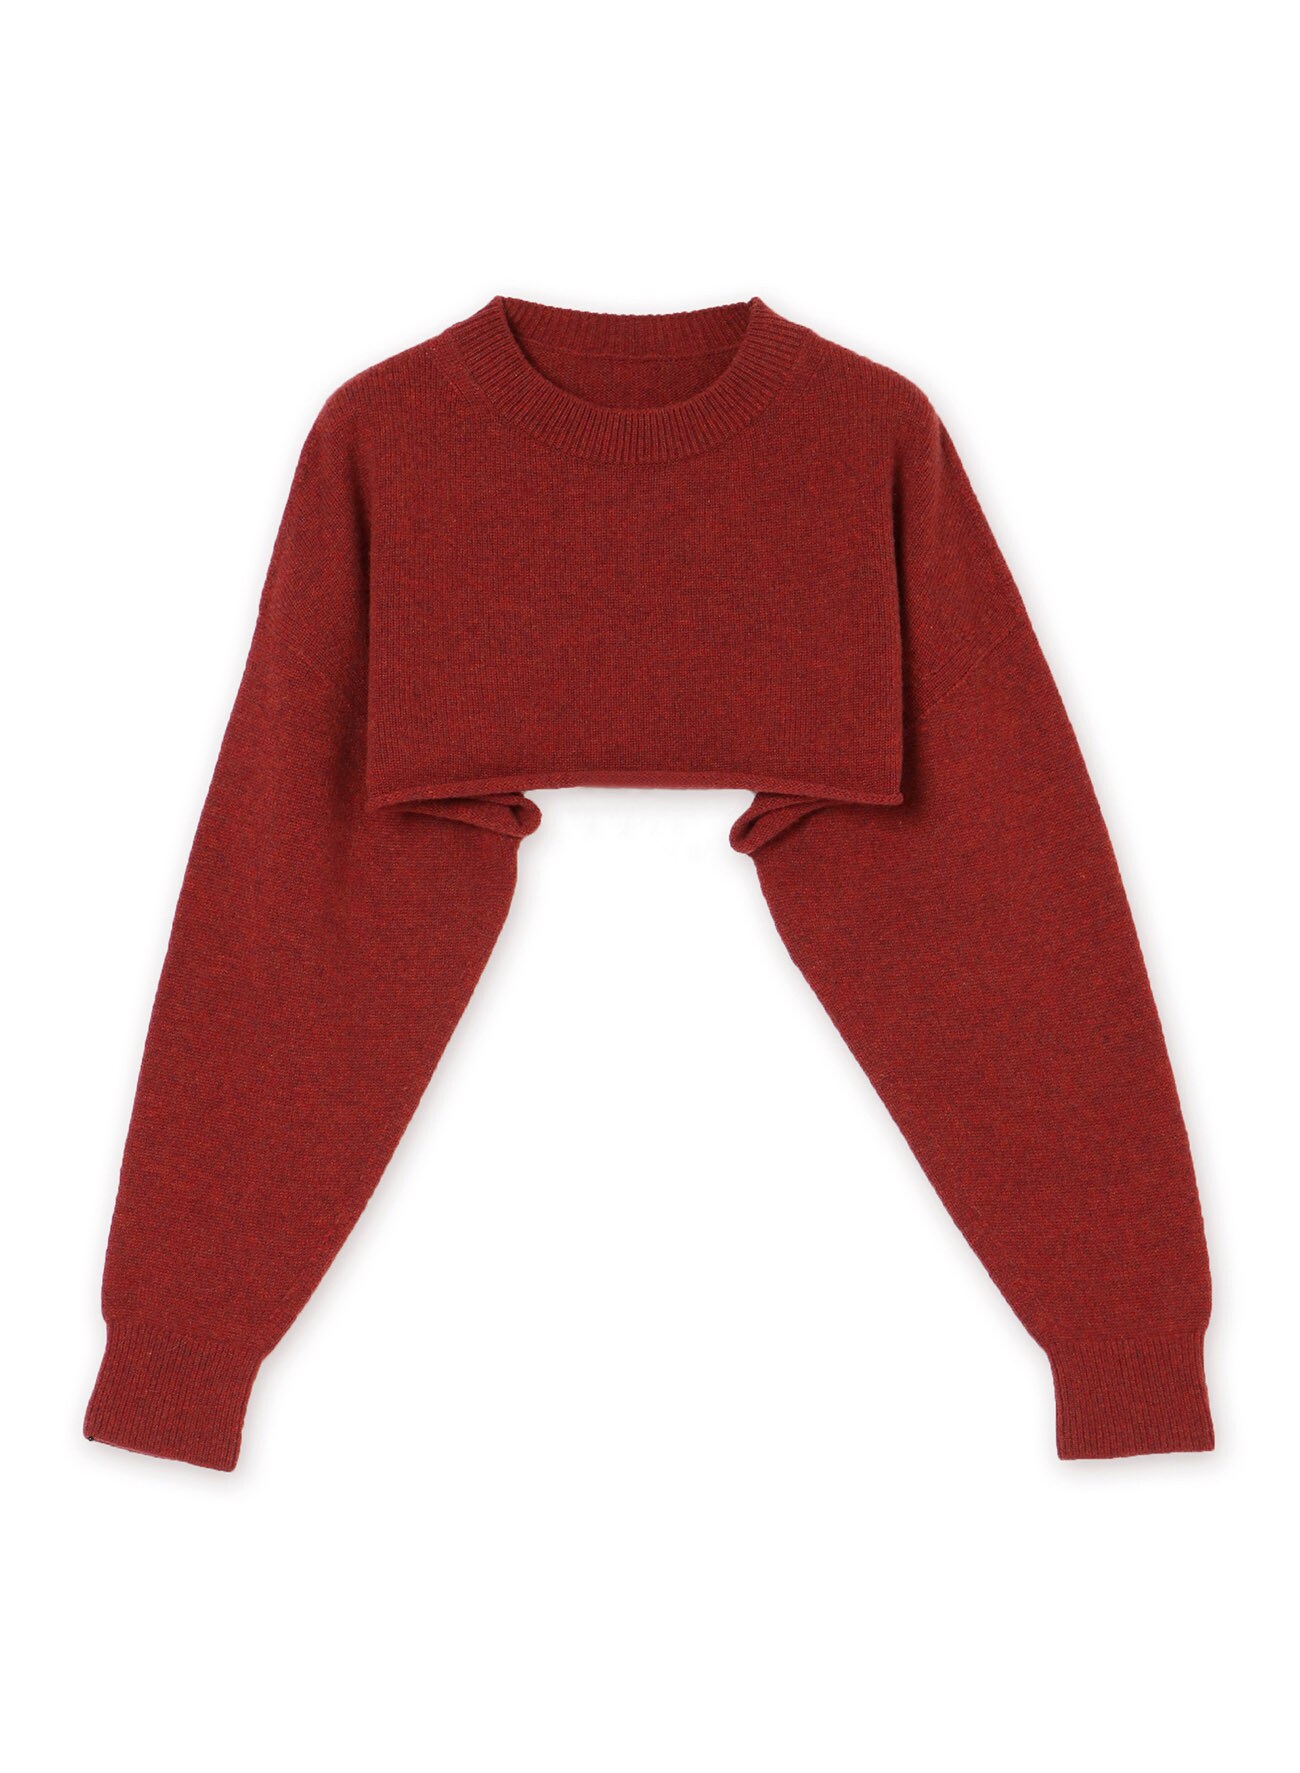 CASHMERE KNIT SHORT PULLOVER(S Red): Vintage 1.1｜THE SHOP YOHJI 